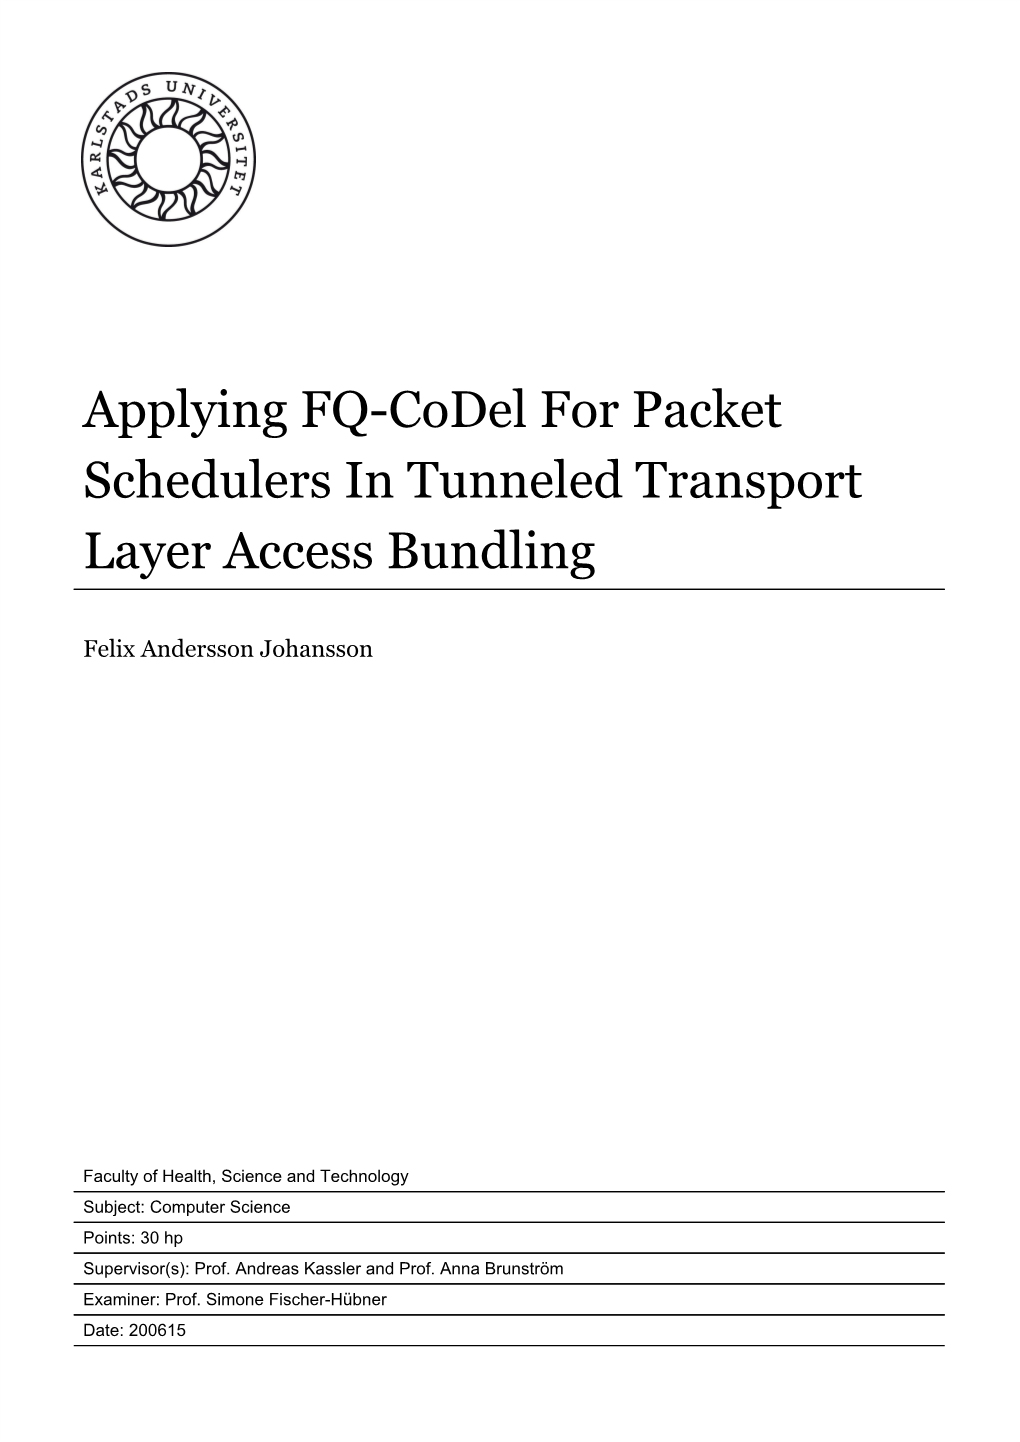 Applying FQ-Codel for Packet Schedulers in Tunneled Transport Layer Access Bundling